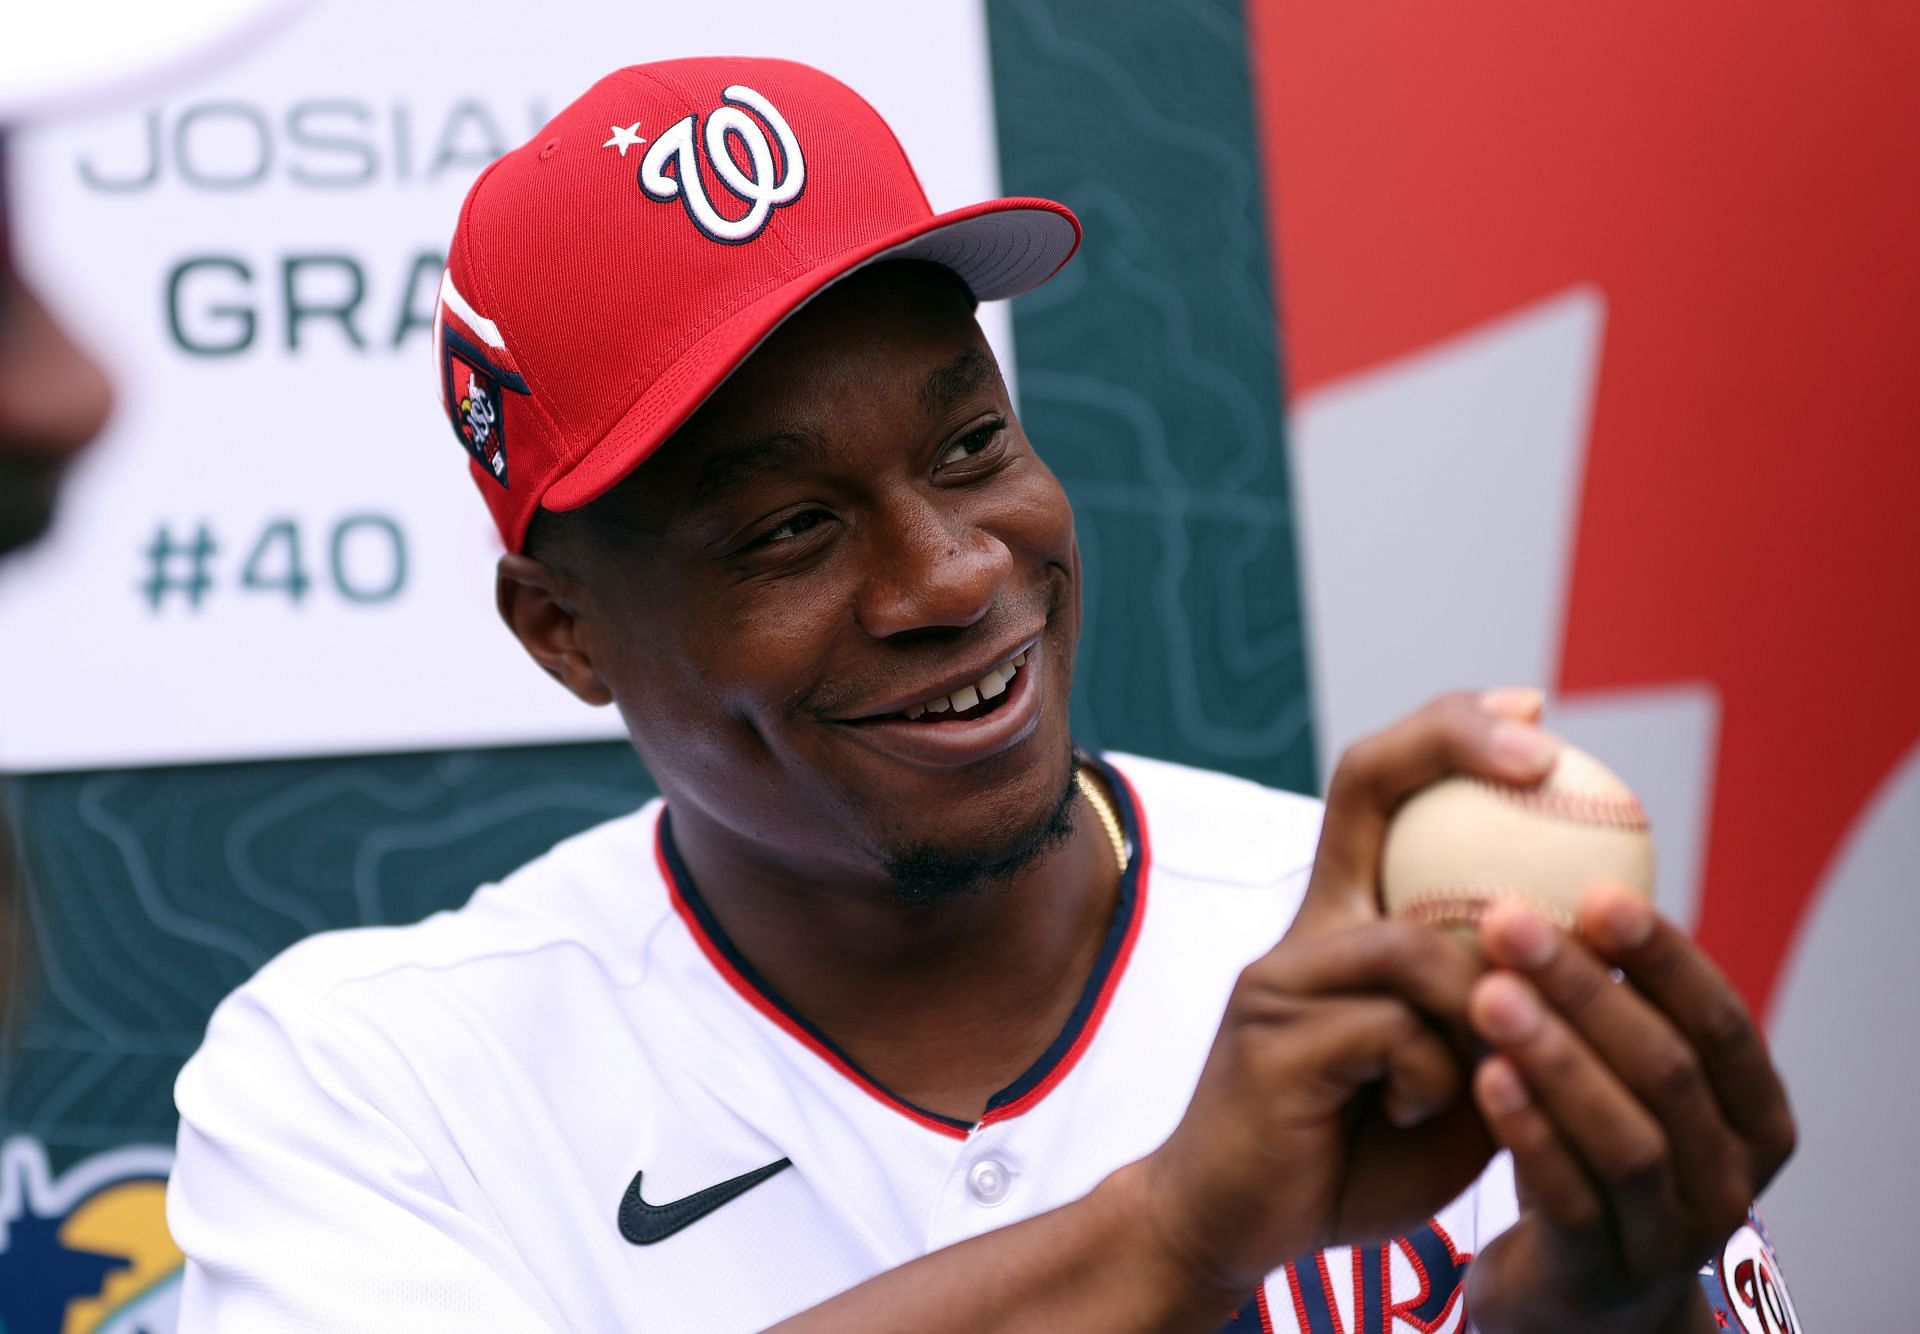 Josiah Gray of the Washington Nationals speaks to the media during Gatorade All-Star Workout Day at T-Mobile Park on Monday in Seattle, Washington.